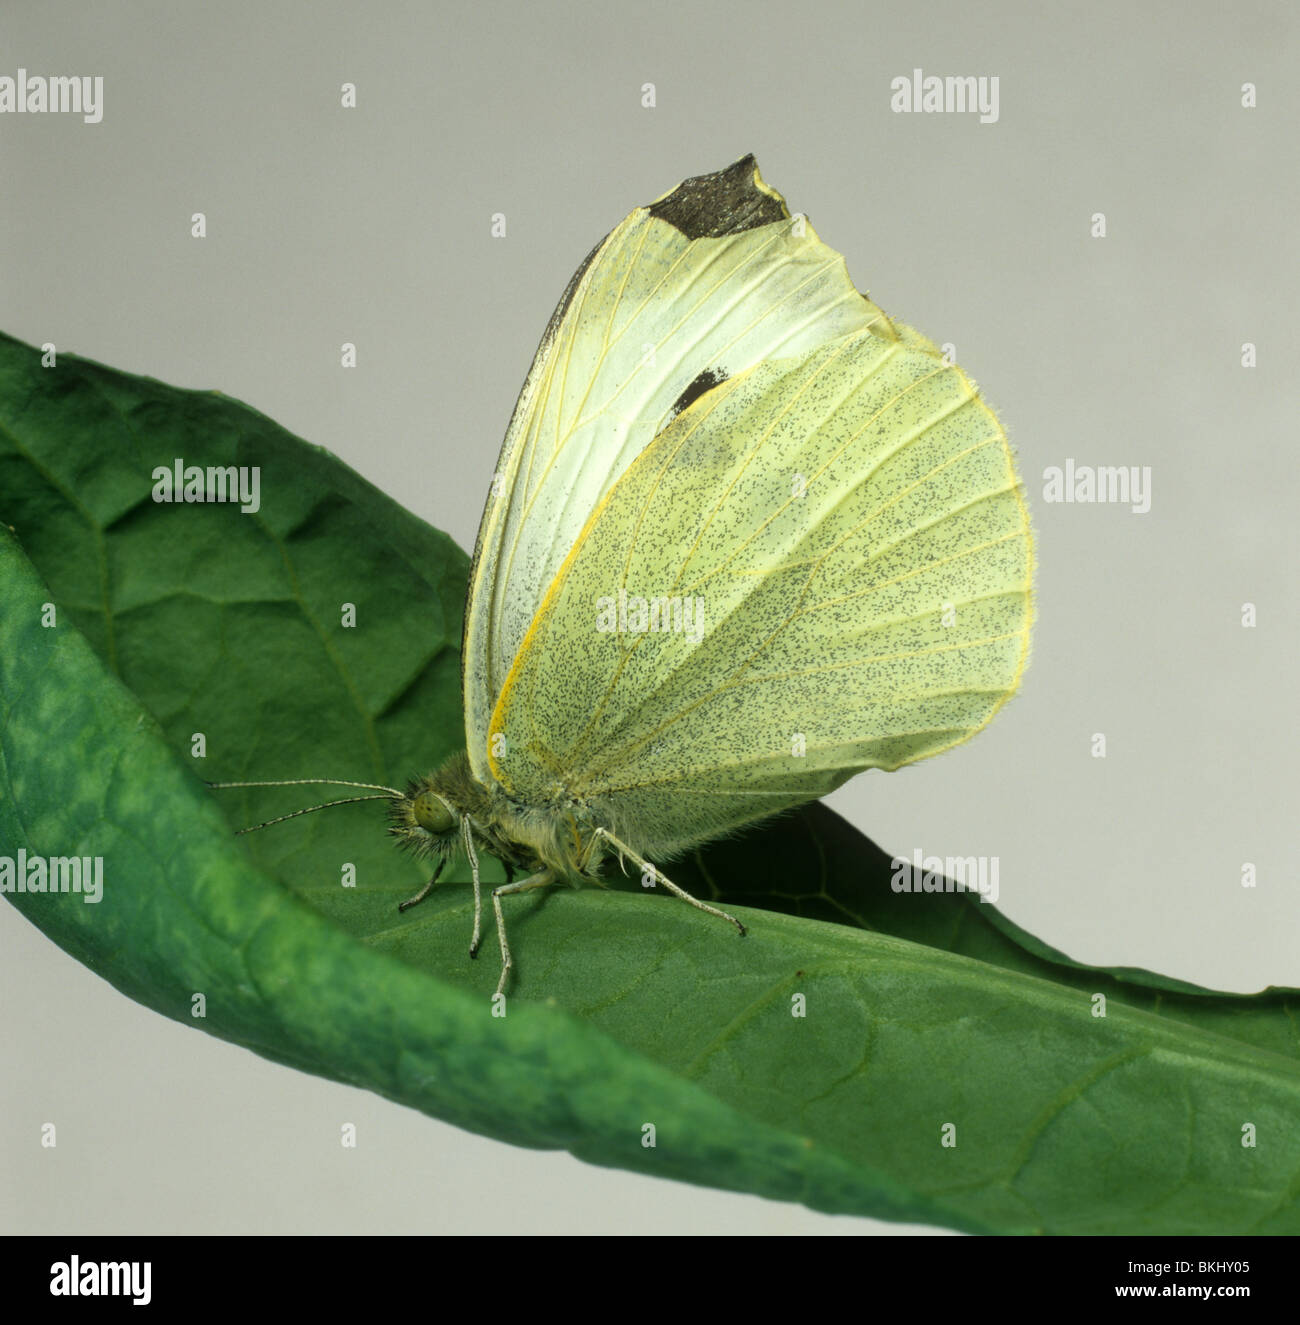 Cabbage white butterfly (Pieris brassicae) adult with closed wings on a cabbage leaf Stock Photo